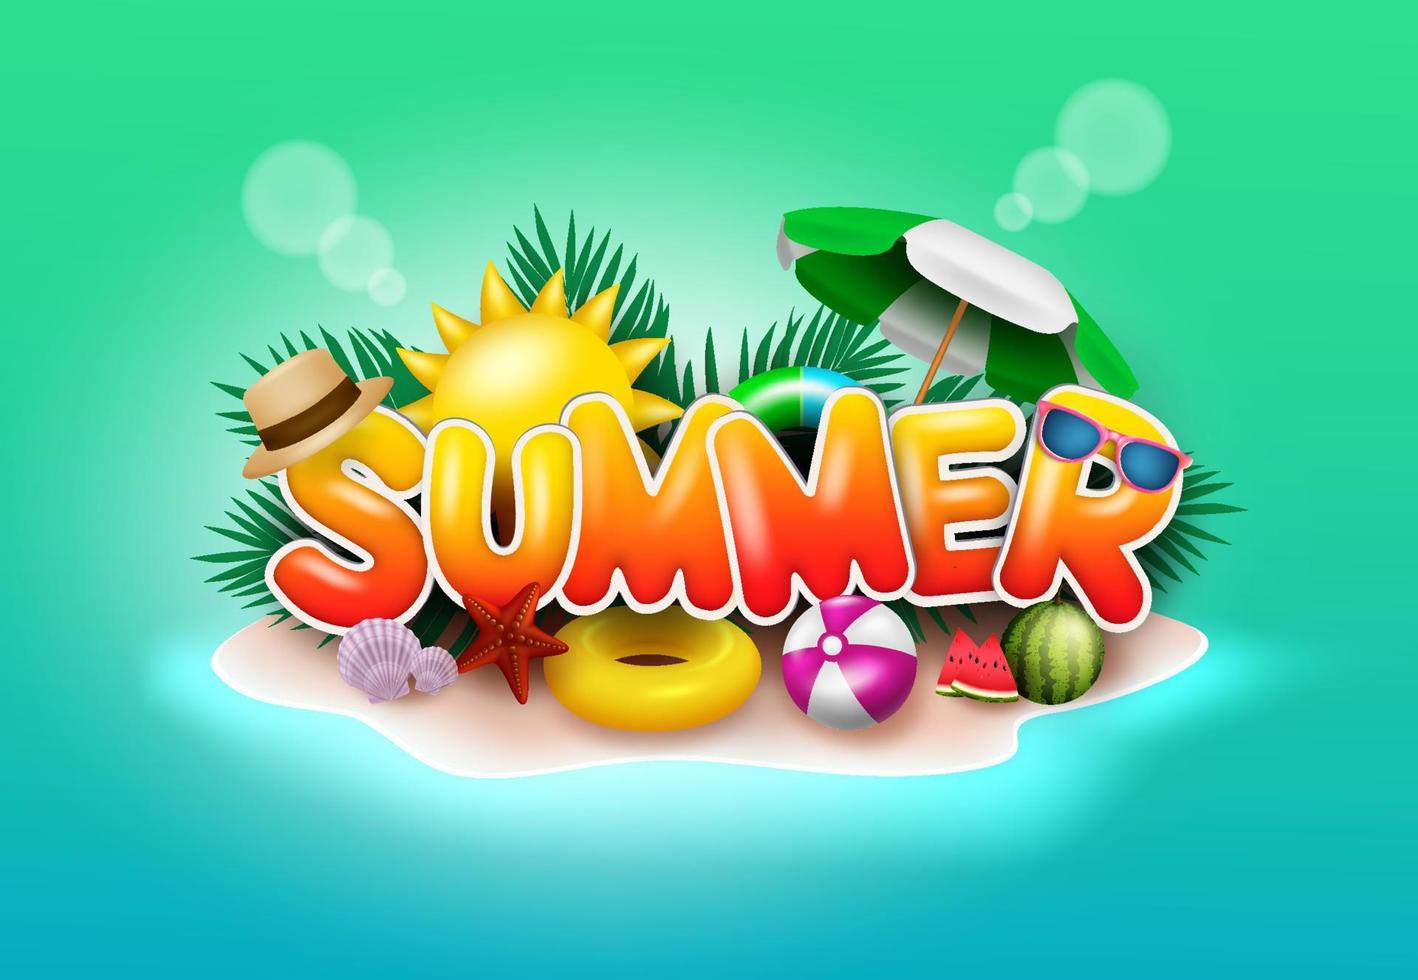 Summer vector banner design. Summer text in beach island background with sun and umbrella elements for fun and enjoy holiday season. Vector illustration